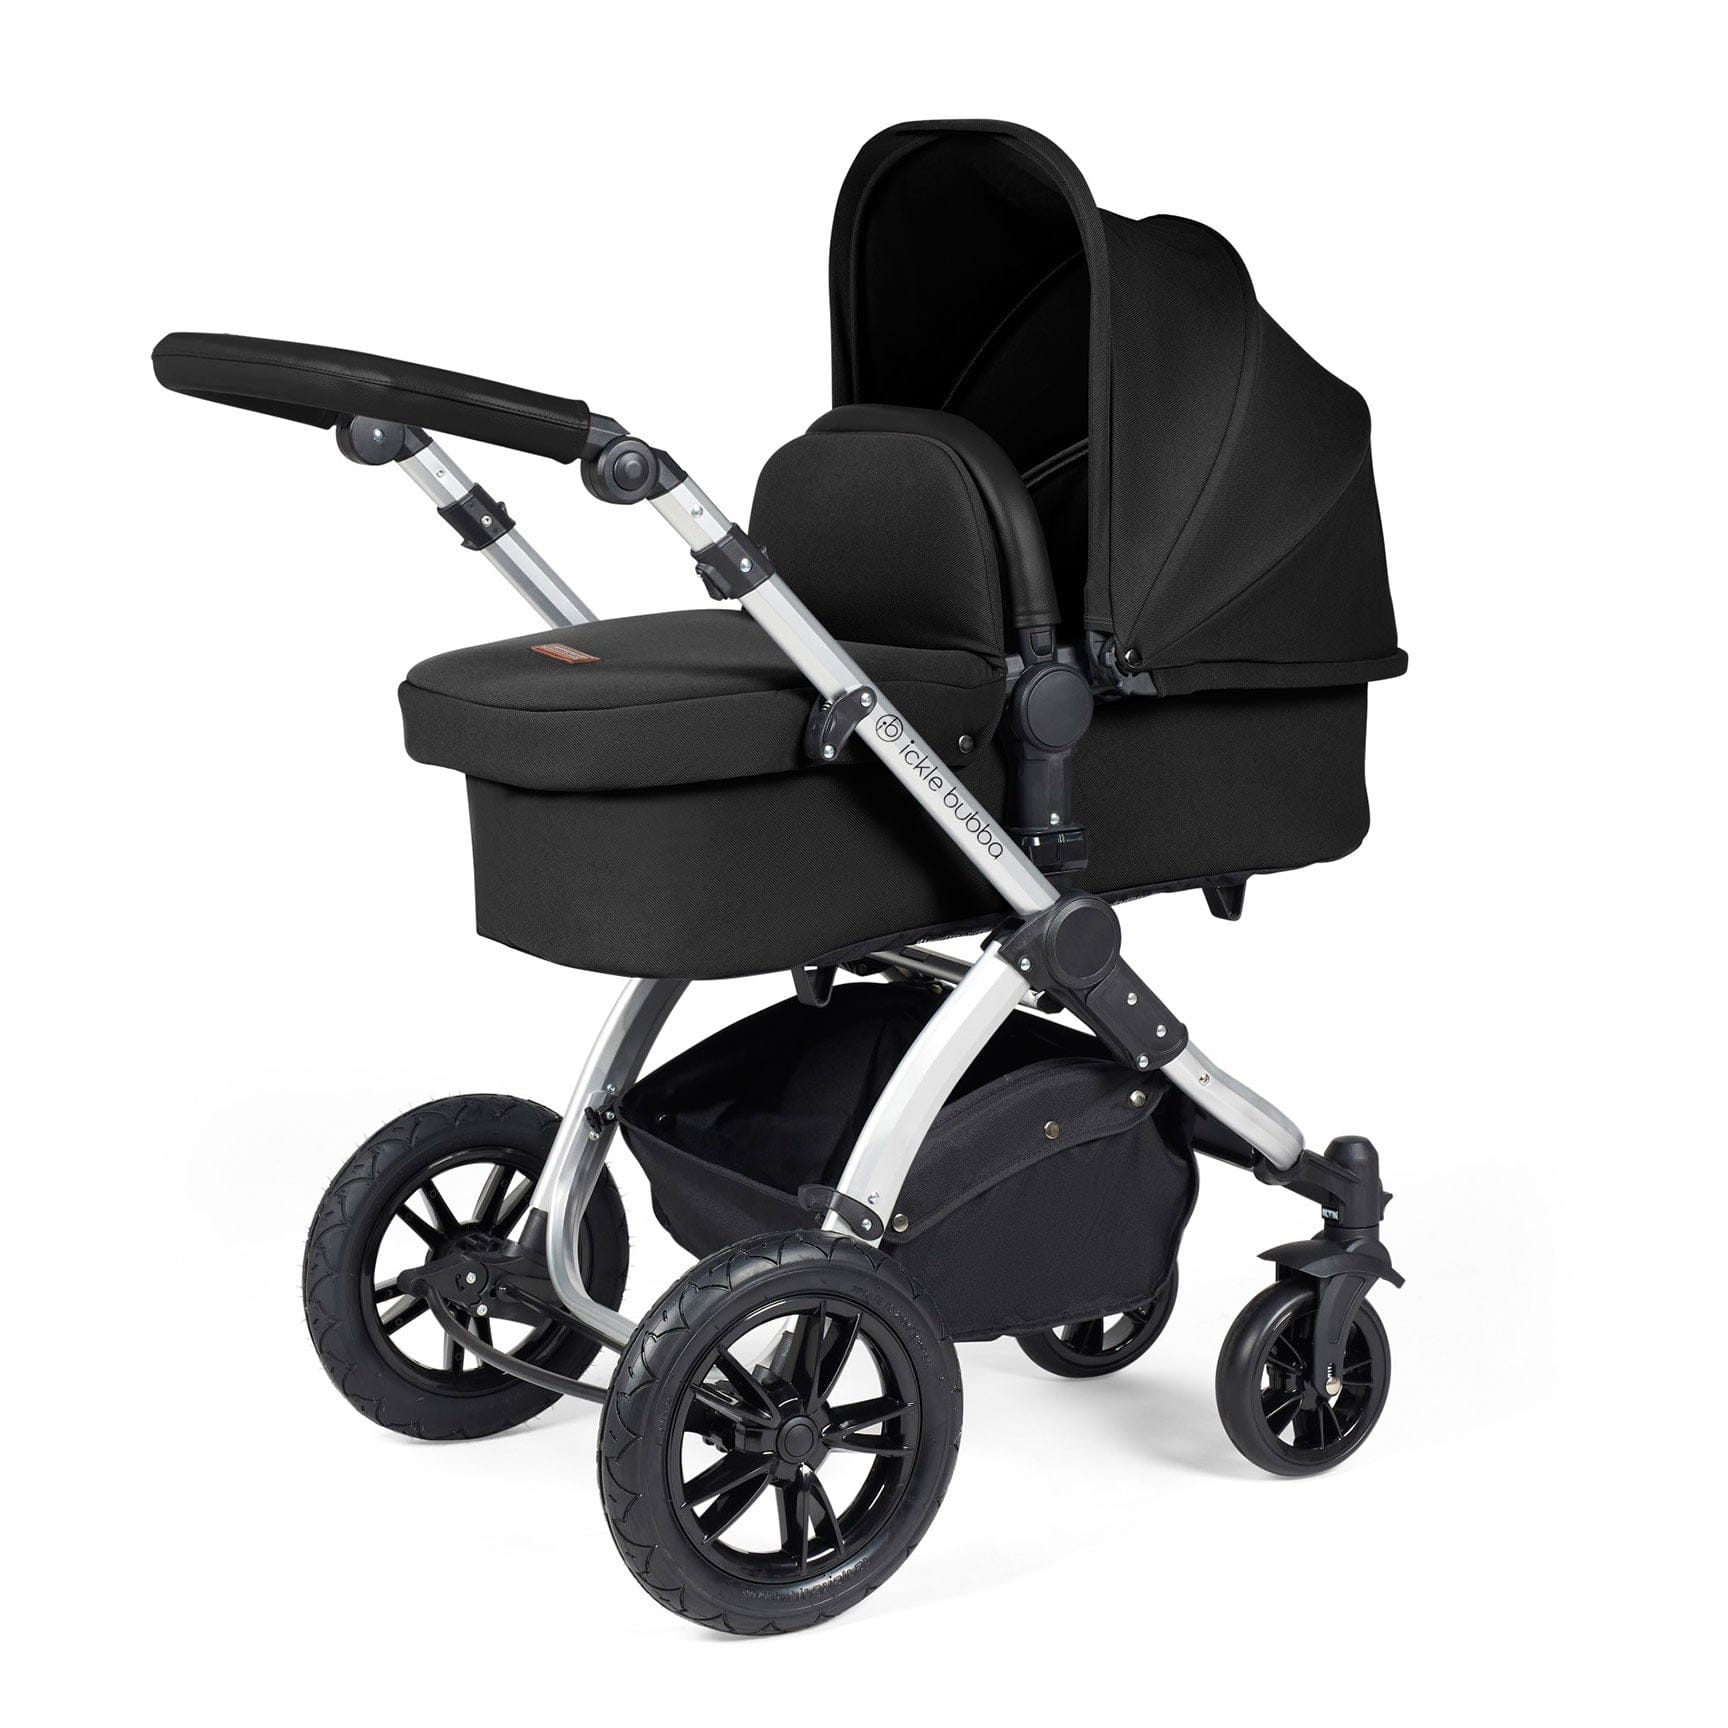 Ickle Bubba travel systems Ickle Bubba Stomp Luxe All-in-One Travel System with Isofix Base - Silver/Midnight/Black 10-011-300-249